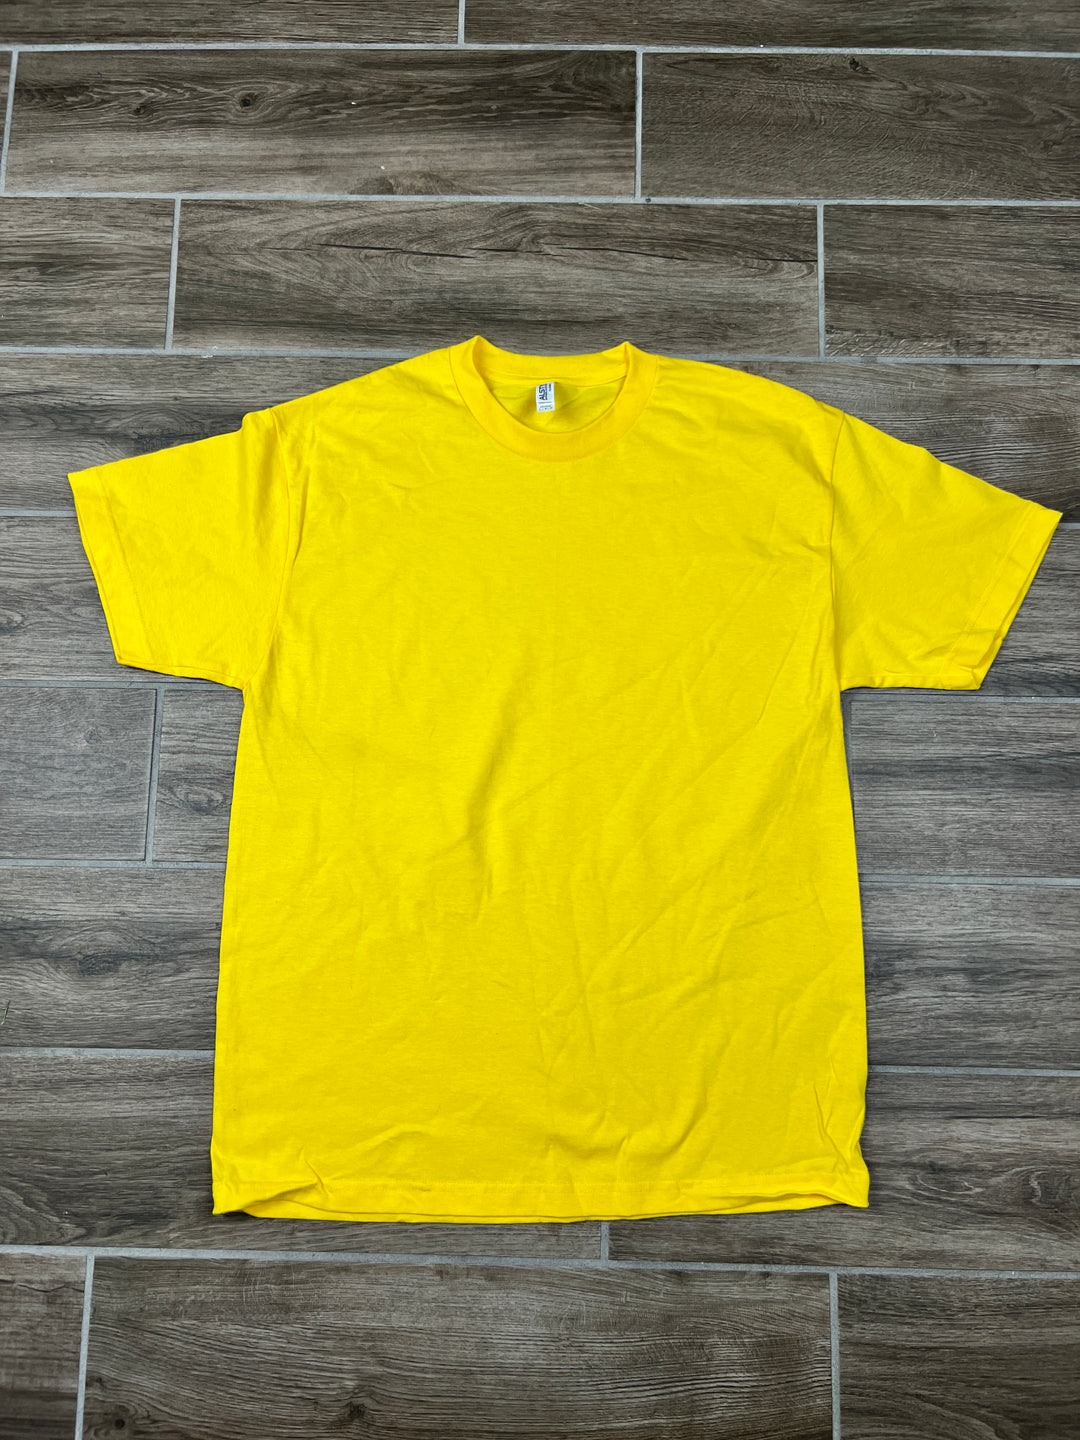 Large - Yellow 1301 Alstyle - DTG Sample